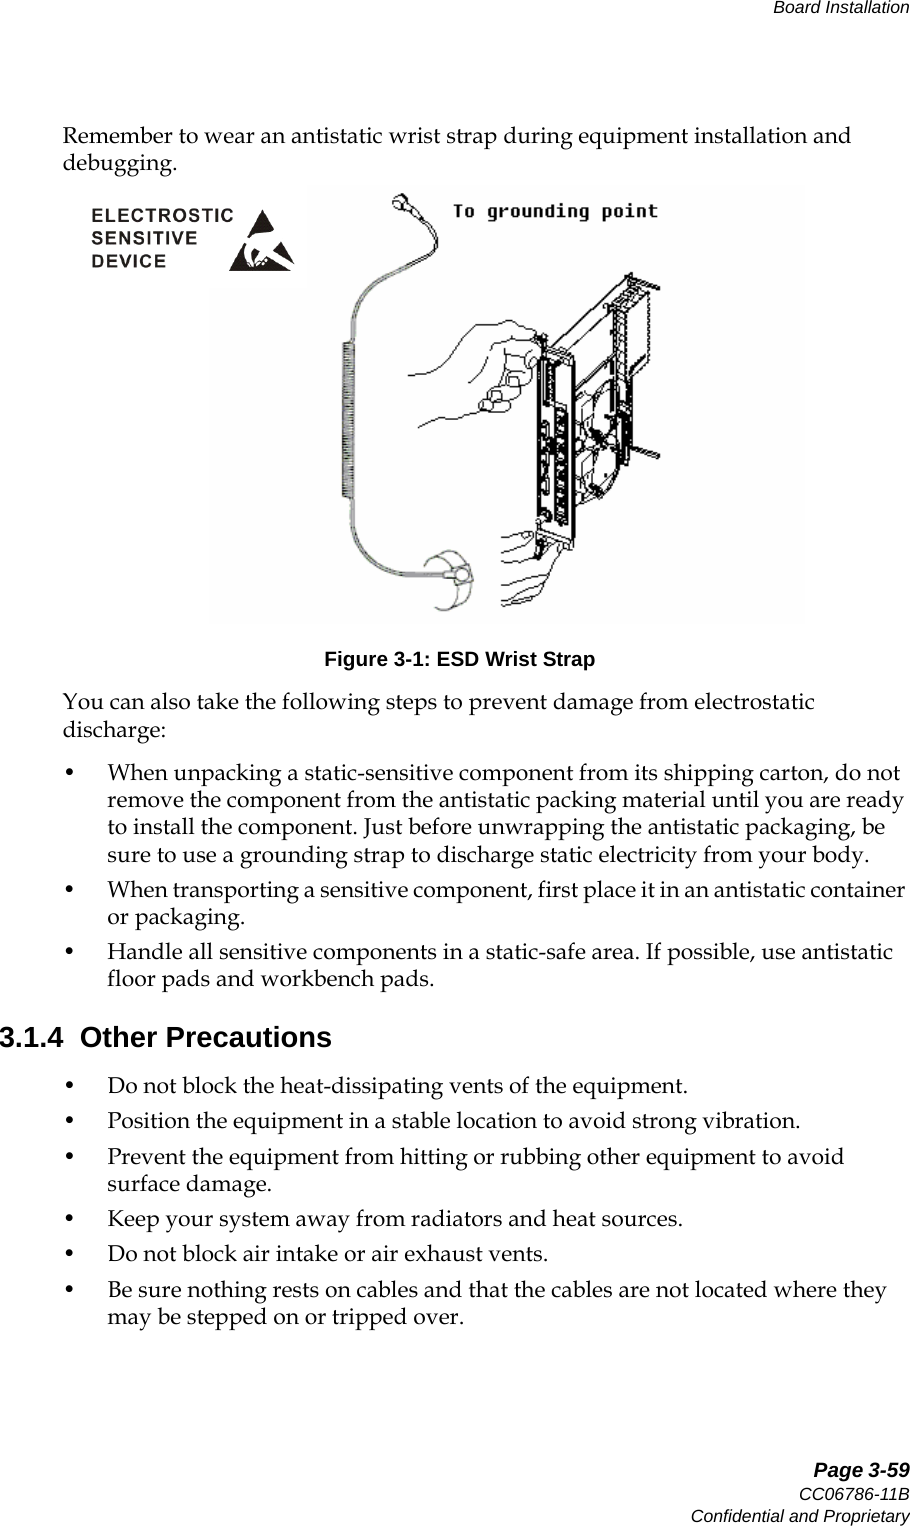   Page 3-59CC06786-11BConfidential and ProprietaryBoard Installation14ABABPreliminaryRemember to wear an antistatic wrist strap during equipment installation and debugging.Figure 3-1: ESD Wrist StrapYou can also take the following steps to prevent damage from electrostatic discharge:• When unpacking a static-sensitive component from its shipping carton, do not remove the component from the antistatic packing material until you are ready to install the component. Just before unwrapping the antistatic packaging, be sure to use a grounding strap to discharge static electricity from your body.• When transporting a sensitive component, first place it in an antistatic container or packaging.• Handle all sensitive components in a static-safe area. If possible, use antistatic floor pads and workbench pads.3.1.4  Other Precautions• Do not block the heat-dissipating vents of the equipment.• Position the equipment in a stable location to avoid strong vibration.• Prevent the equipment from hitting or rubbing other equipment to avoid surface damage.• Keep your system away from radiators and heat sources.• Do not block air intake or air exhaust vents.• Be sure nothing rests on cables and that the cables are not located where they may be stepped on or tripped over.  